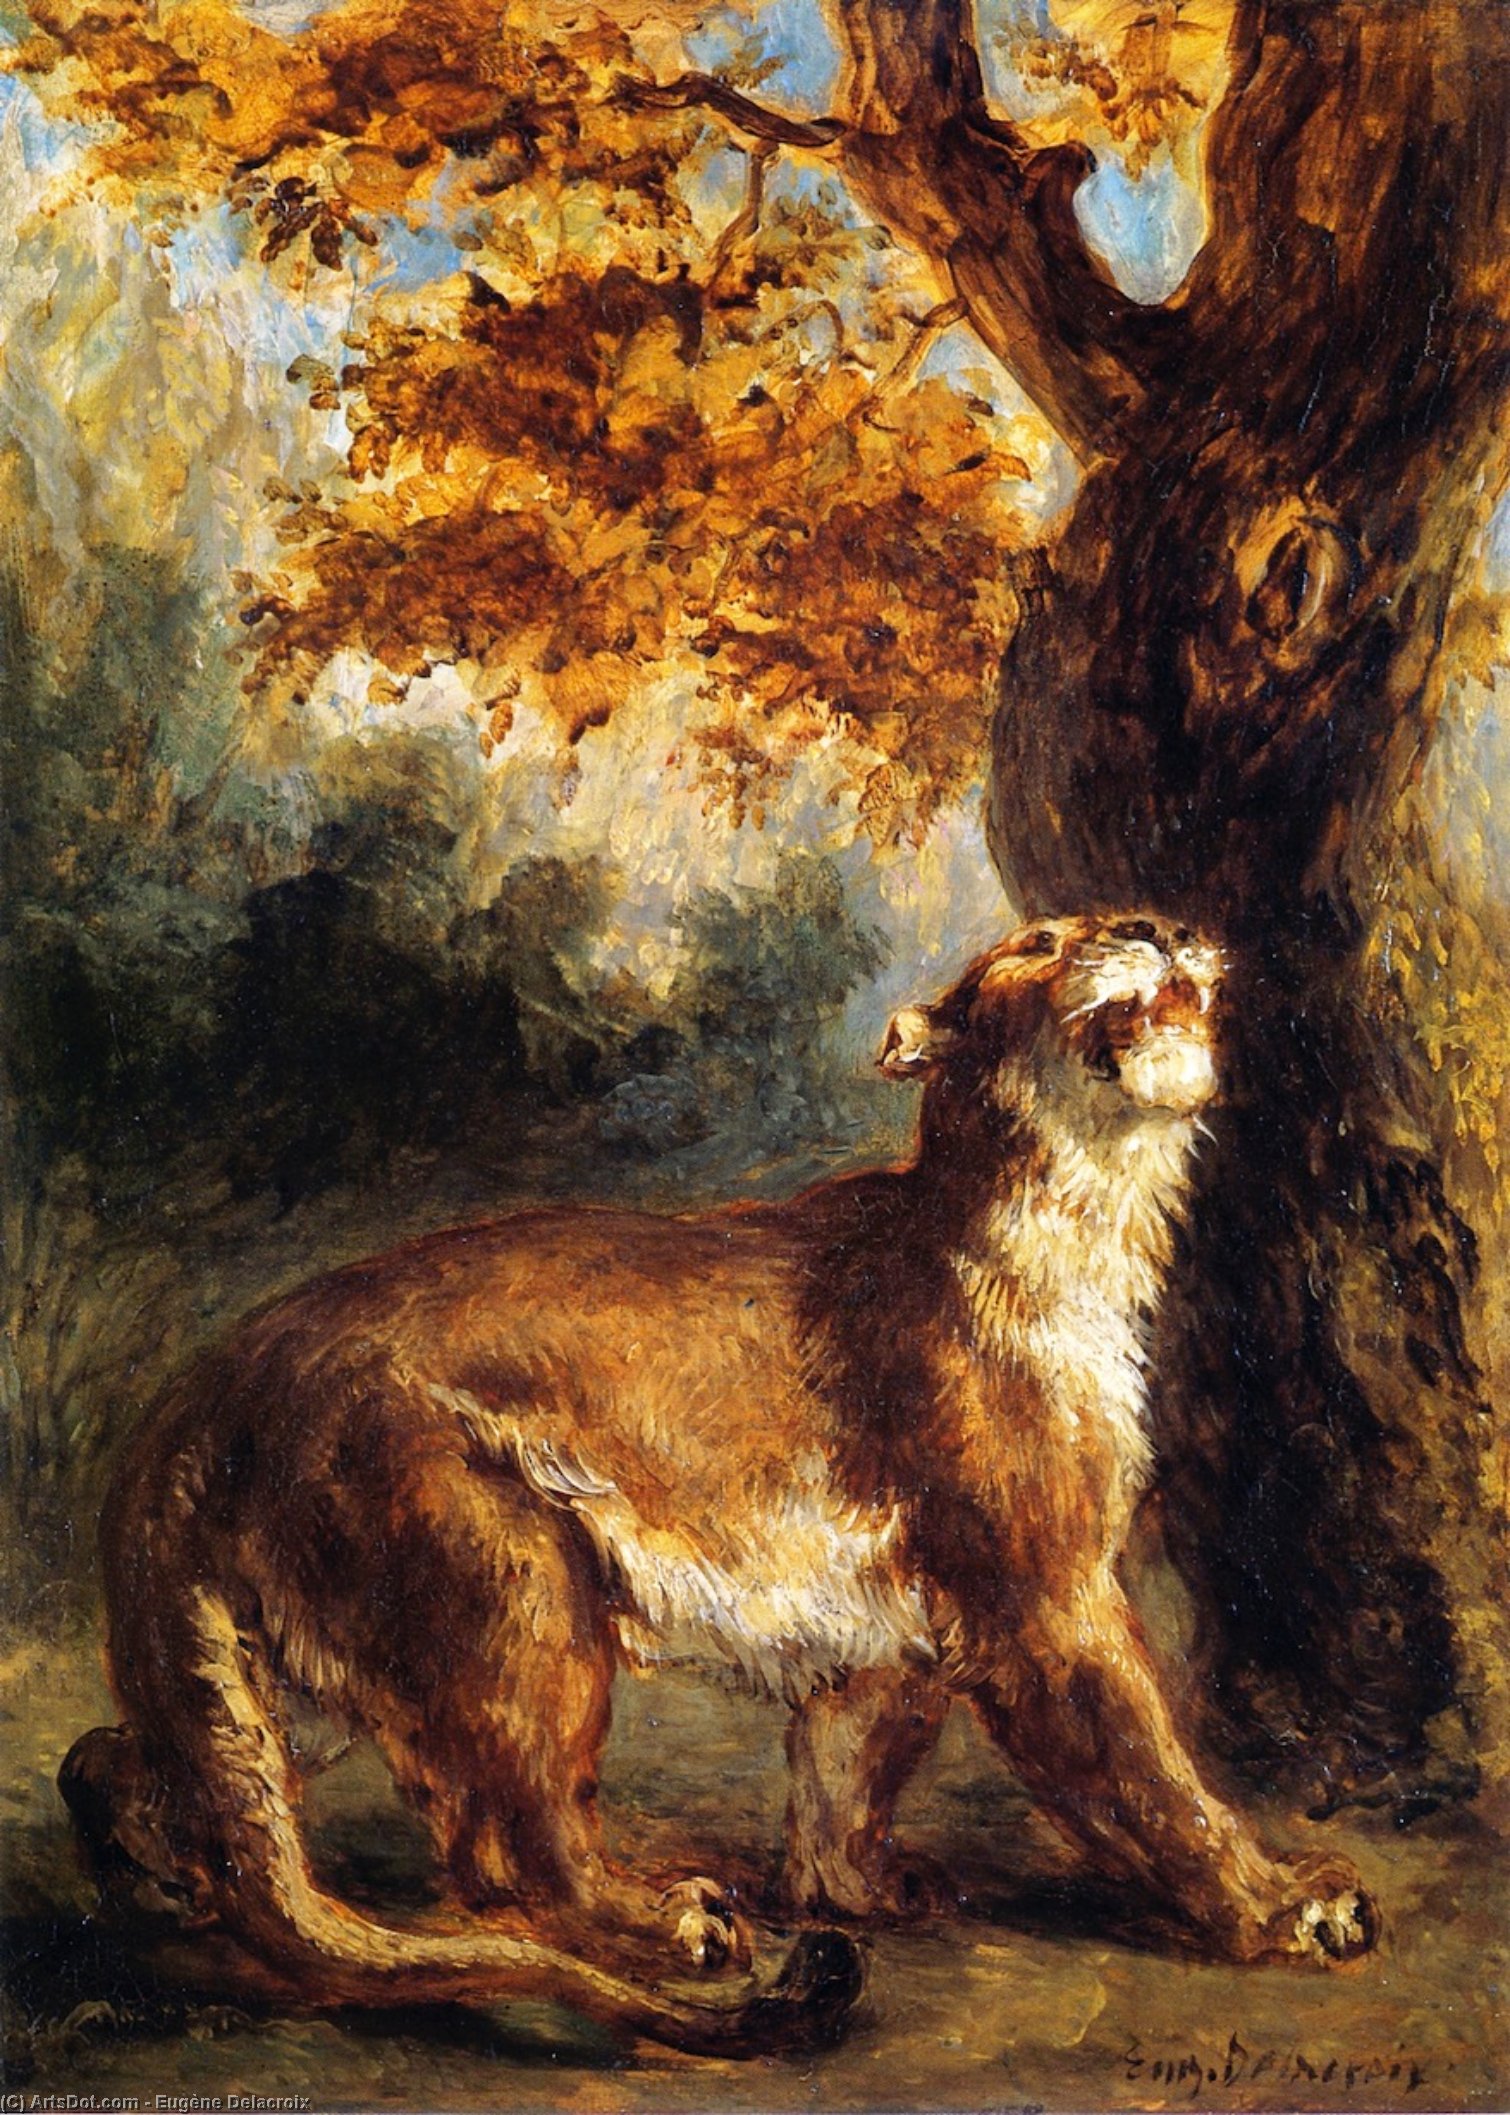 WikiOO.org - دایره المعارف هنرهای زیبا - نقاشی، آثار هنری Eugène Delacroix - Lioness Stalking Its Prey (also known as Lioness Standing by a Tree)